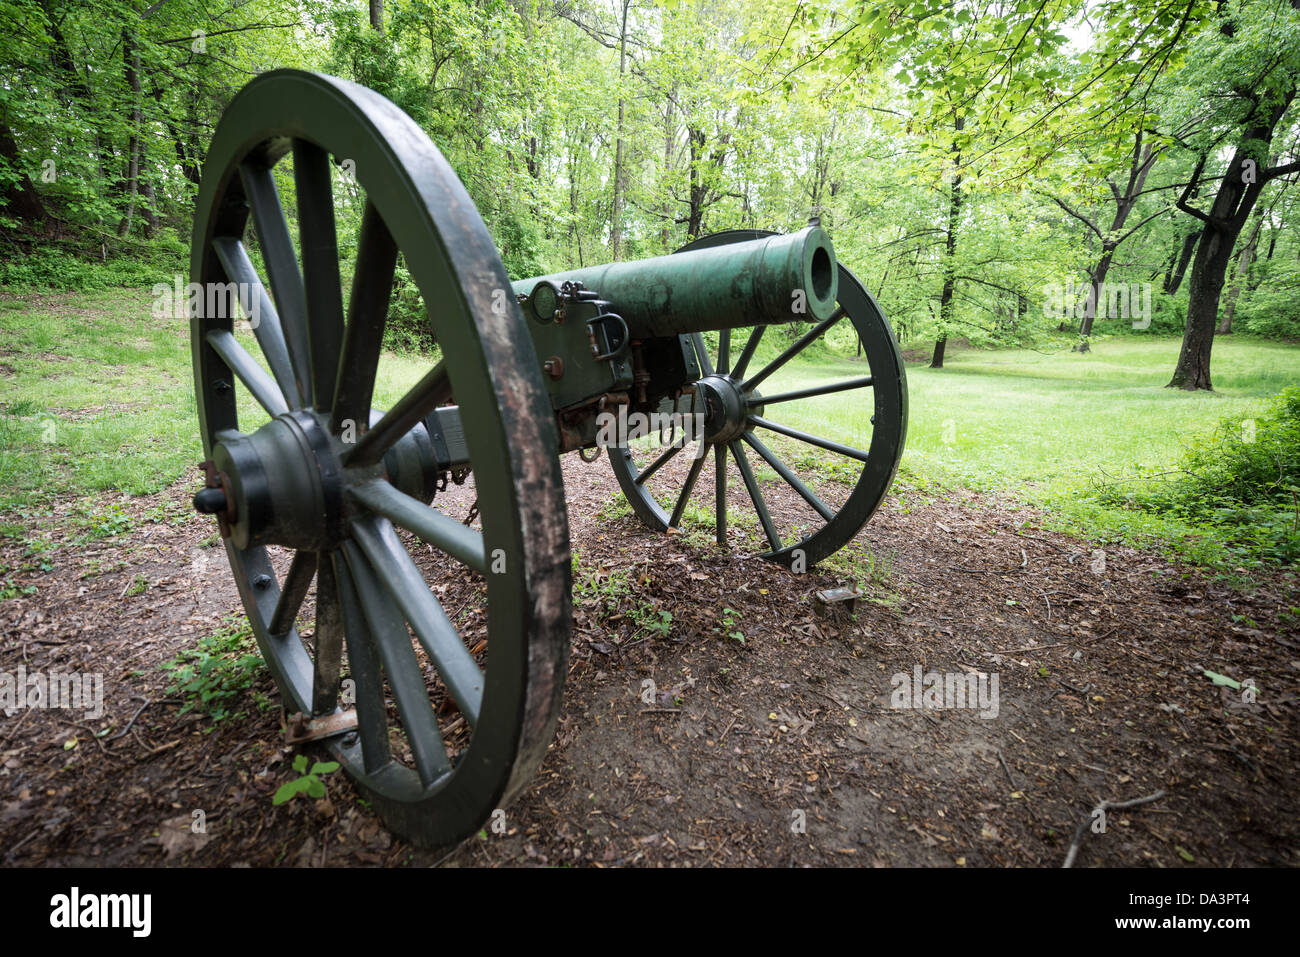 MCLEAN, Virginia - Historic cannon at Fort Marcy. On the banks of the Potomac in McLean, Virginia, just west of Washington DC, Fort Marcy is an historic site on the George Washington Parkway managed by the National Park Service. During the Civil War it was one of several forts that surrounded Washington DC to protect the city. Stock Photo